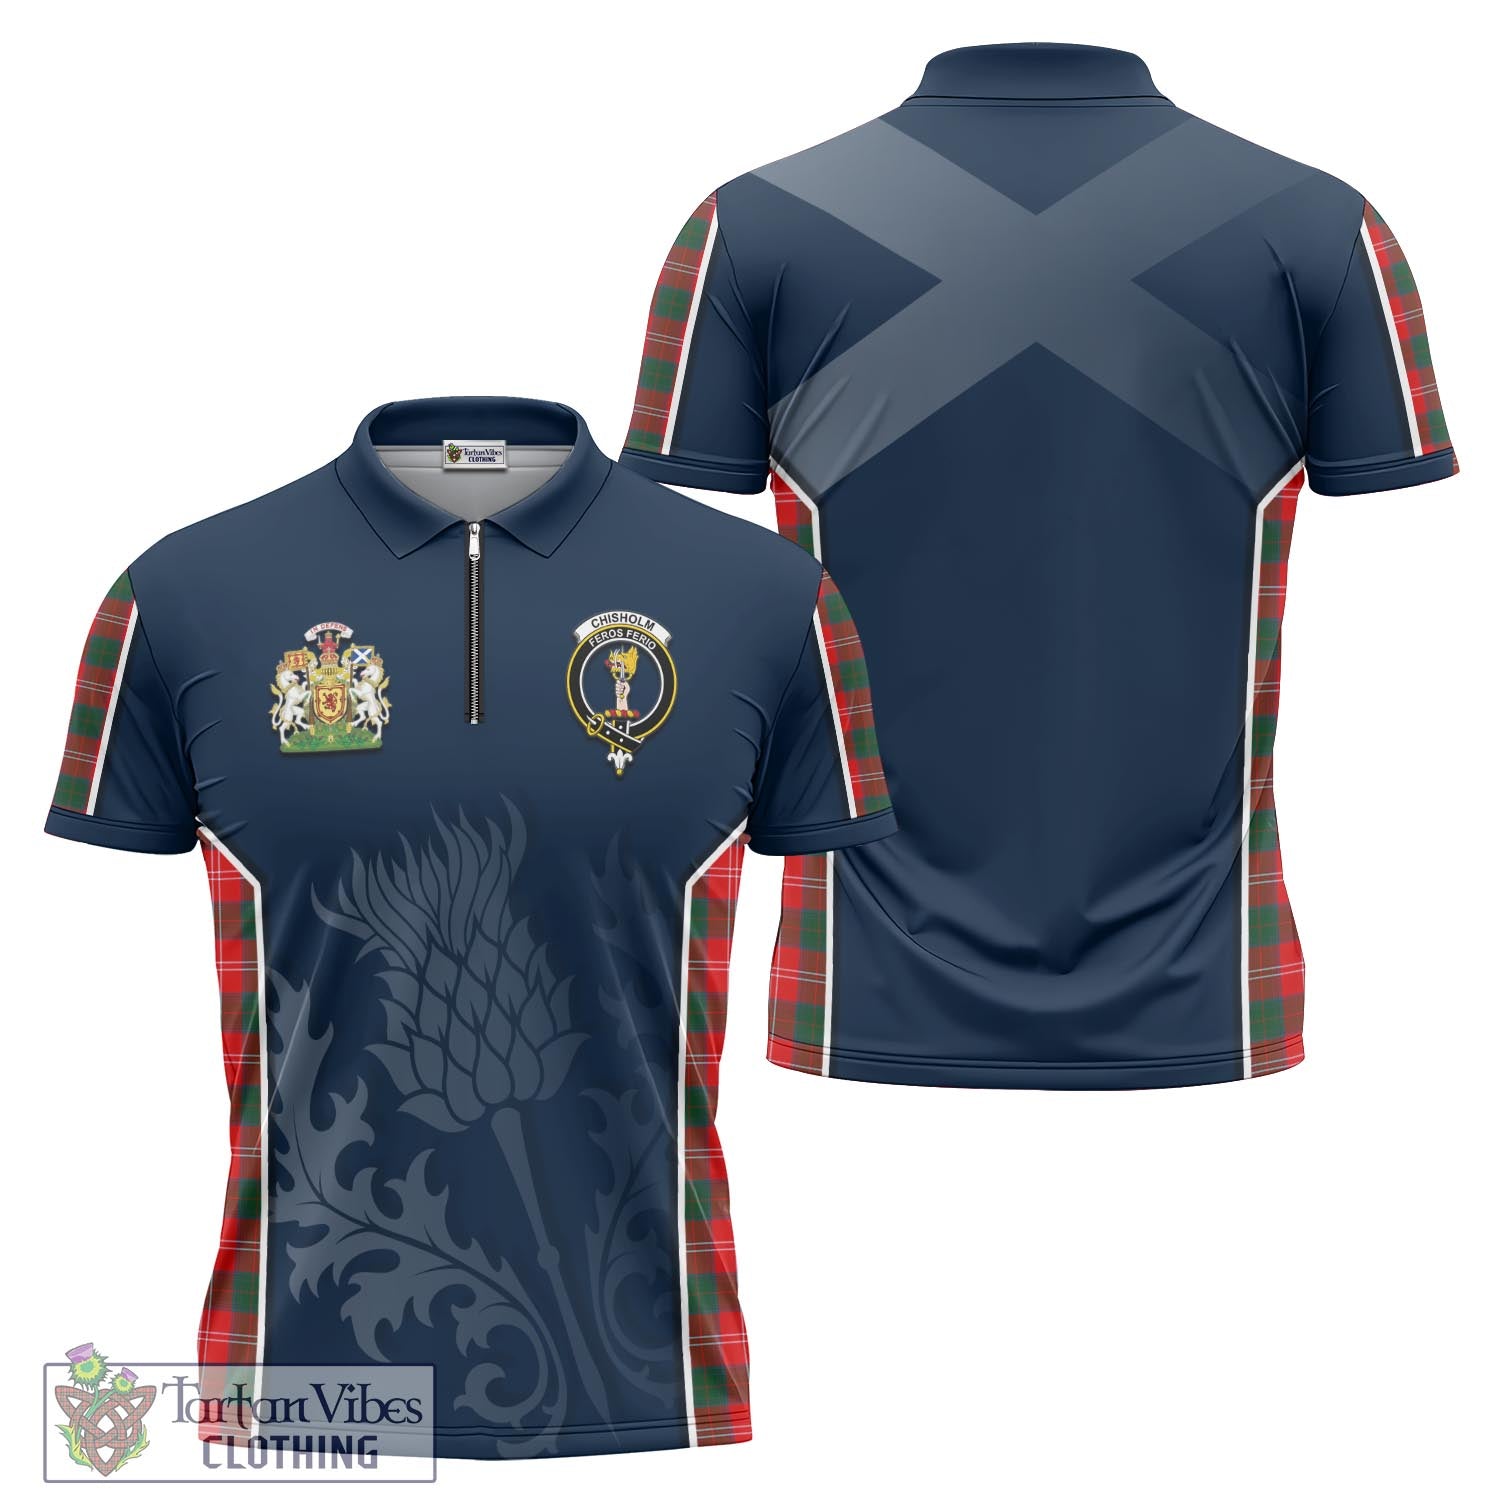 Tartan Vibes Clothing Chisholm Modern Tartan Zipper Polo Shirt with Family Crest and Scottish Thistle Vibes Sport Style